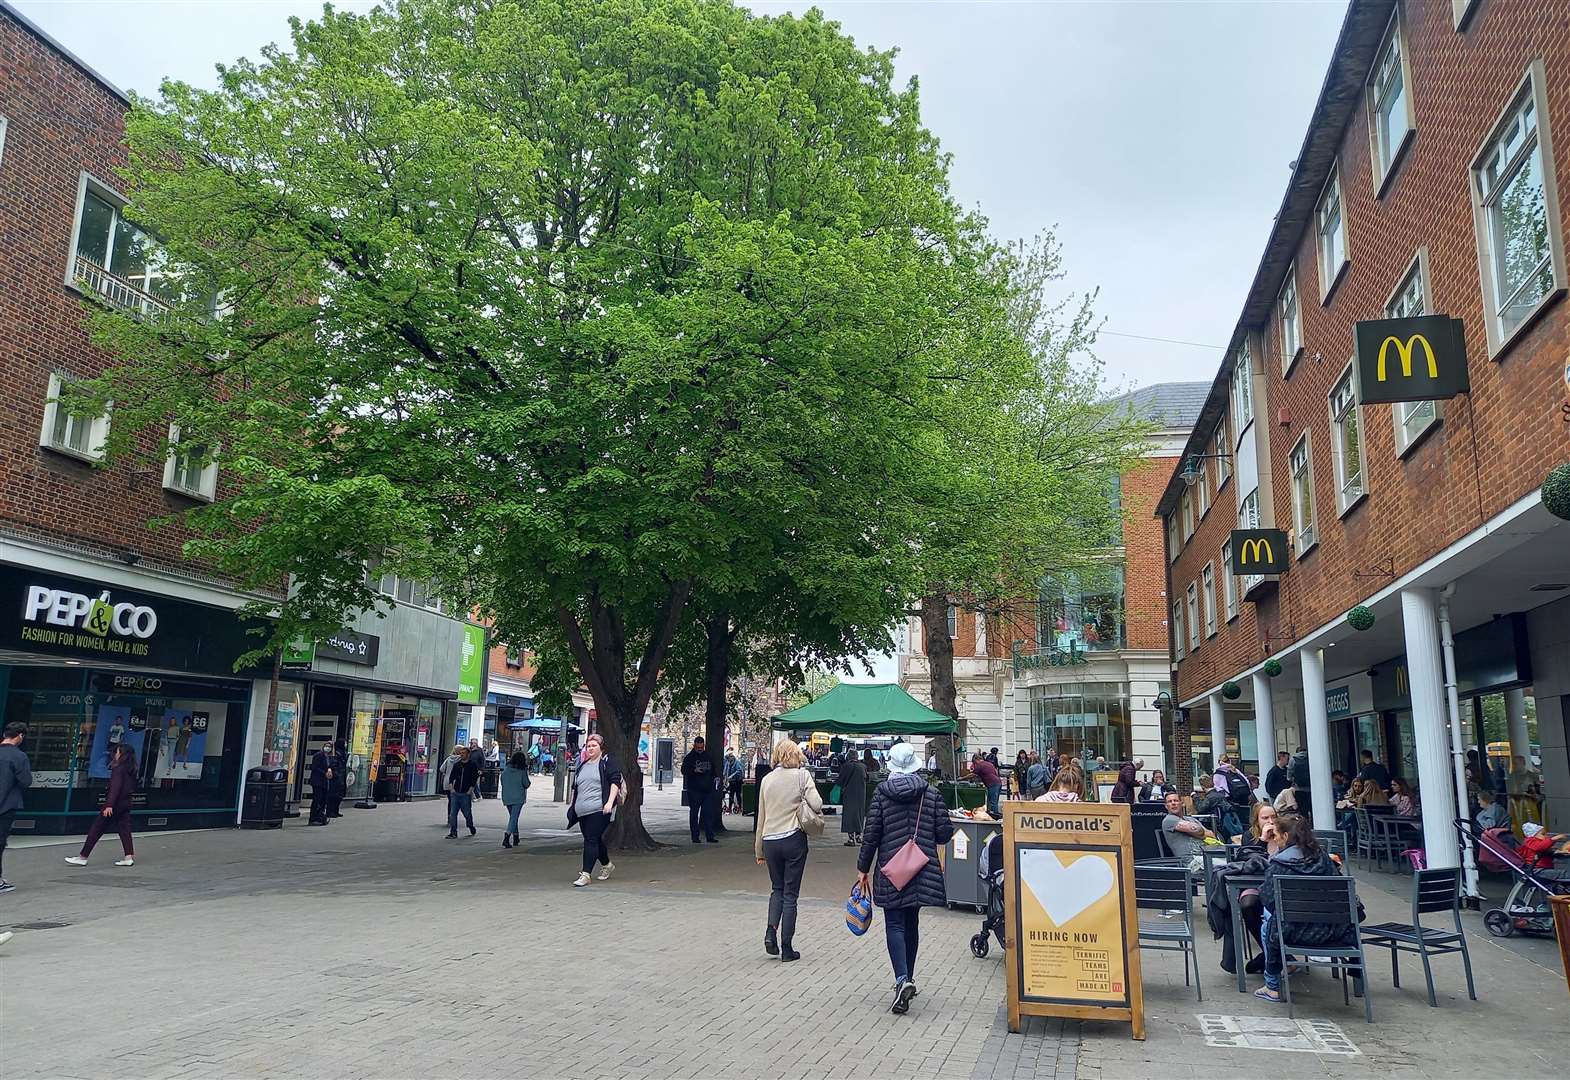 Five trees in the city's high street were set to be chopped down